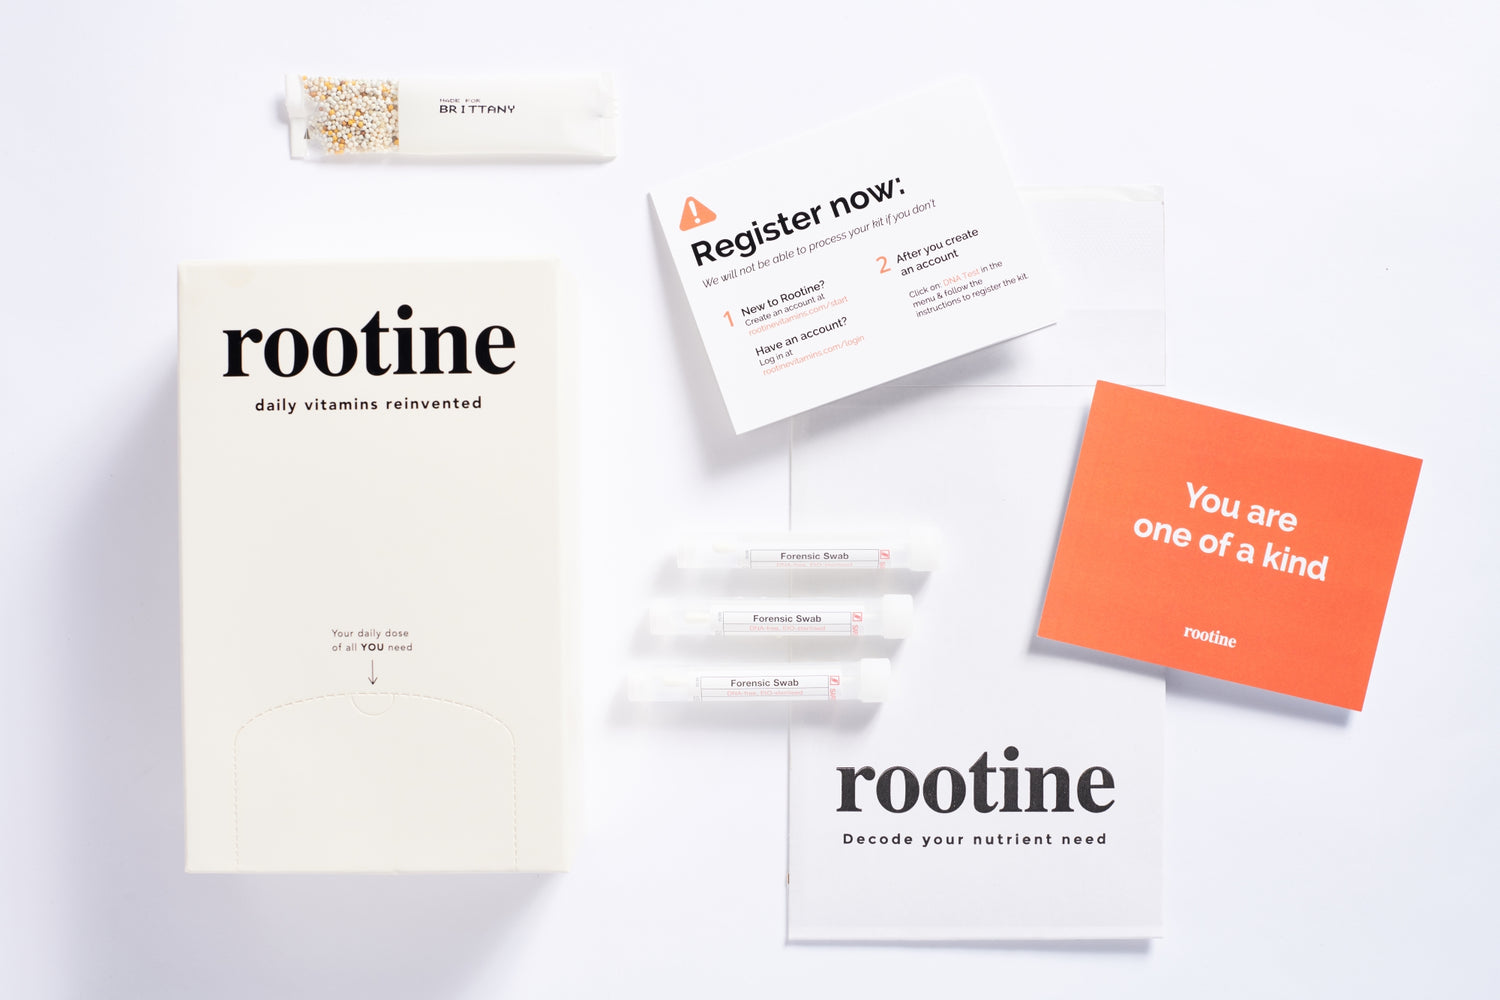 8 Reasons Why Rootine is The Best Daily Vitamin